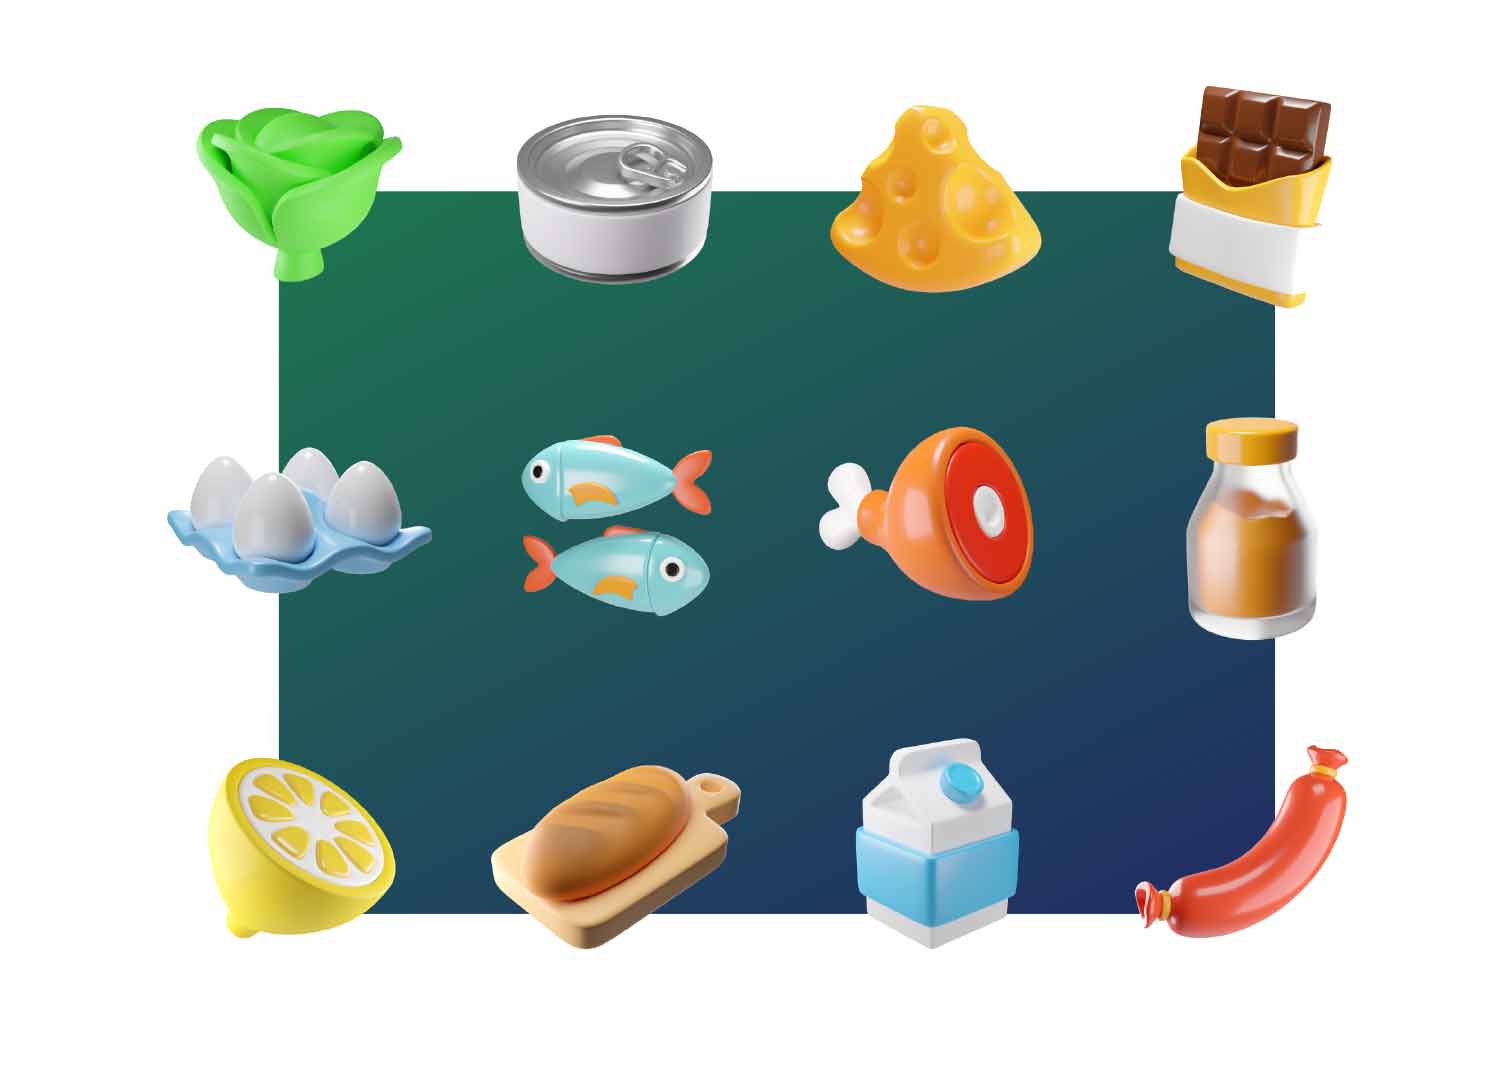 Simple 3D icons of on Food related theme. Transparent PNG, Blender Source files.